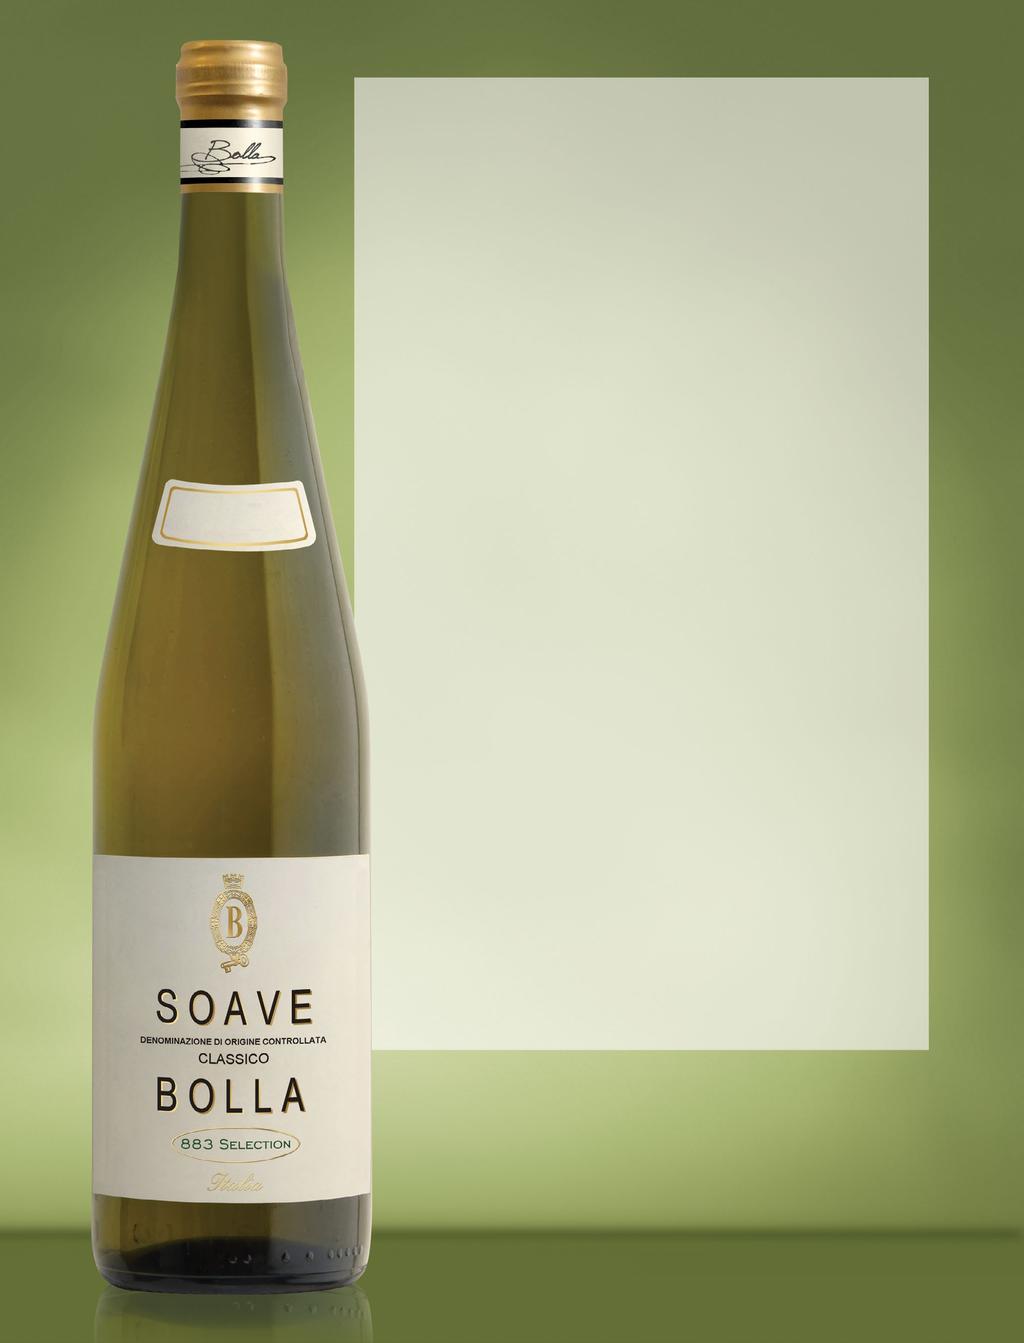 S U P E R P R E M I U M T I E R SOAVE CLASSICO 883 DESCRIPTION SHEET Soave Classico DOC 883 Production Area: Grape Variety: Description: Hills of Soave in the heart of the Classico zone, Italy.